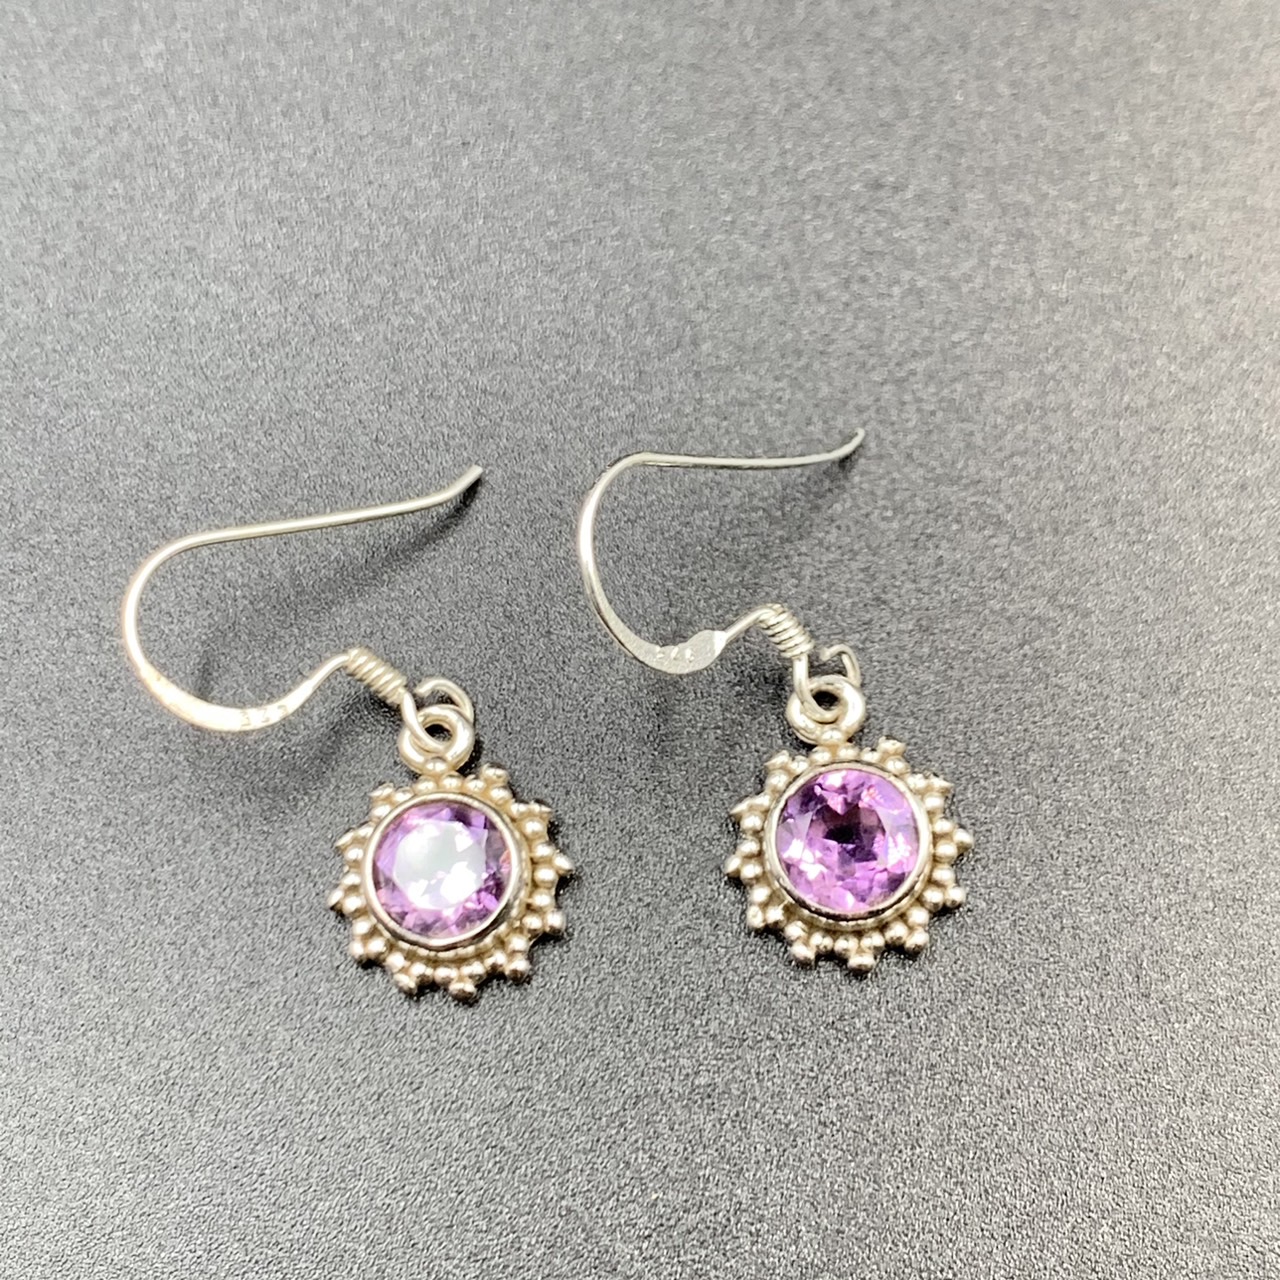 Amethyst With Handmade Silver Earrings - Image 3 of 3